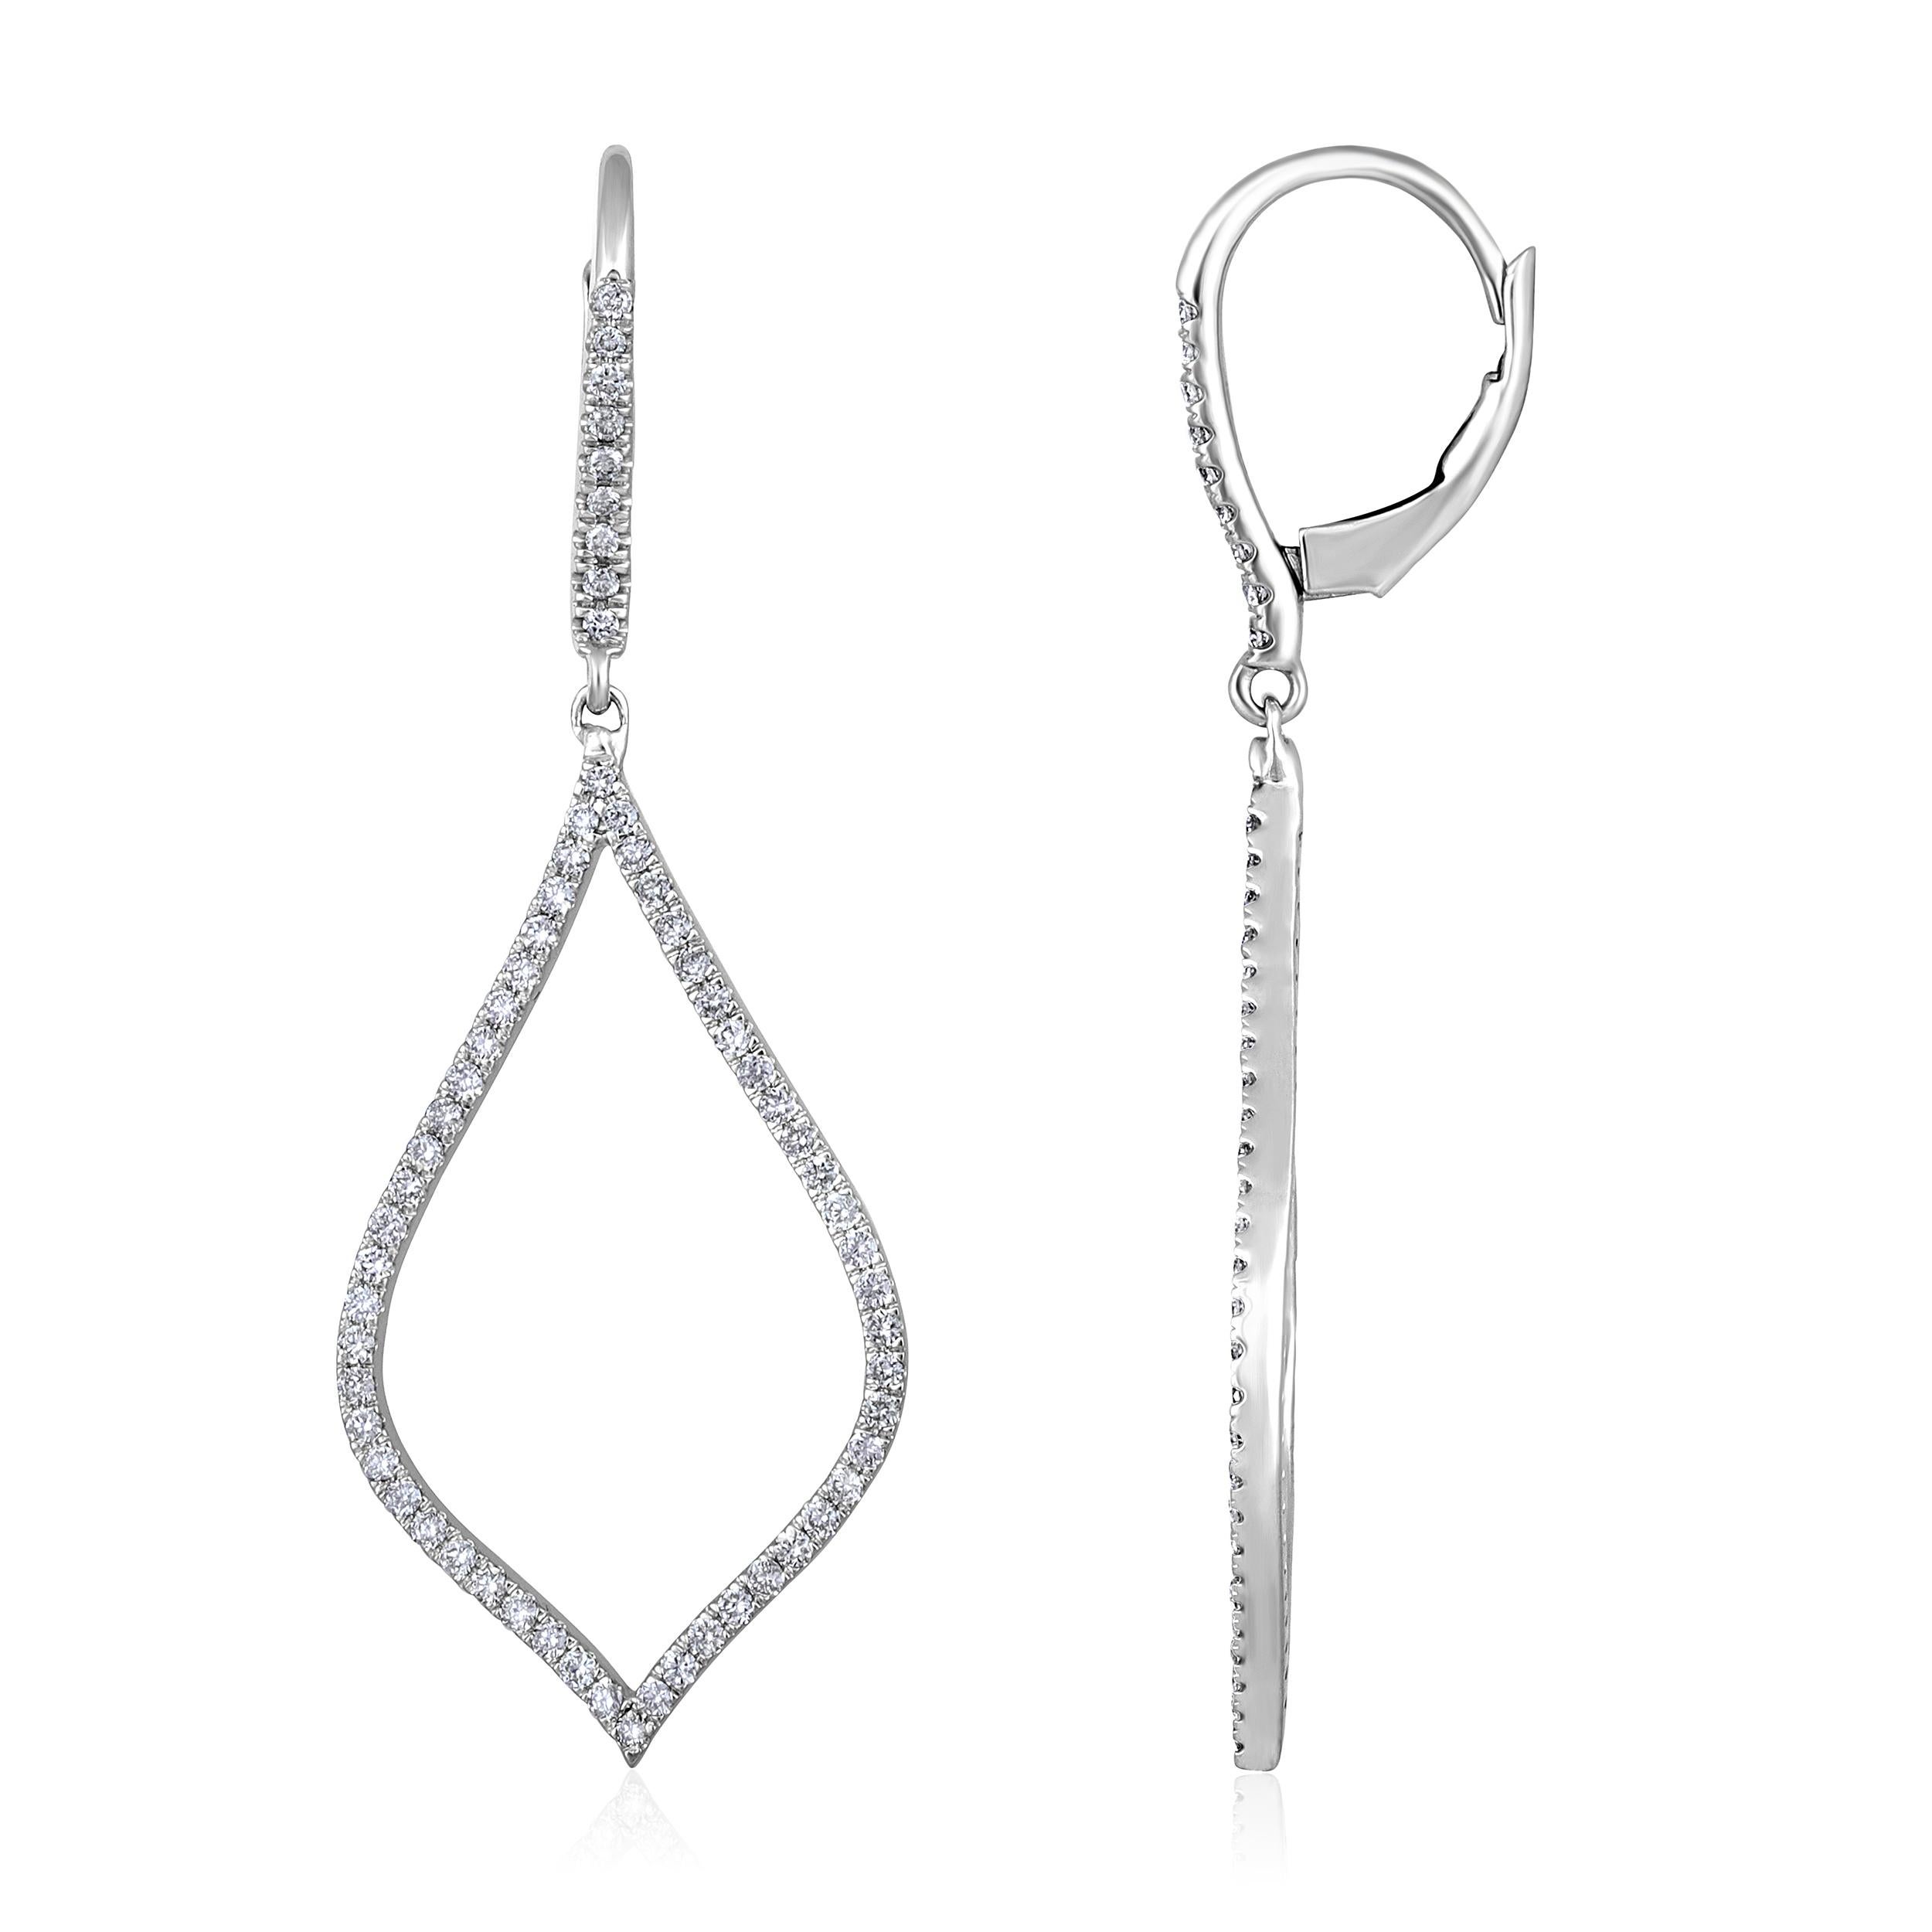 Crafted in 3.68 grams of 14K White Gold, the earrings contain 126 stones of Round Natural Diamonds with a total of 0.73 carat in F-G color and SI clarity.

CONTEMPORARY AND TIMELESS ESSENCE: Crafted in 14-karat/18-karat with 100% natural diamond and